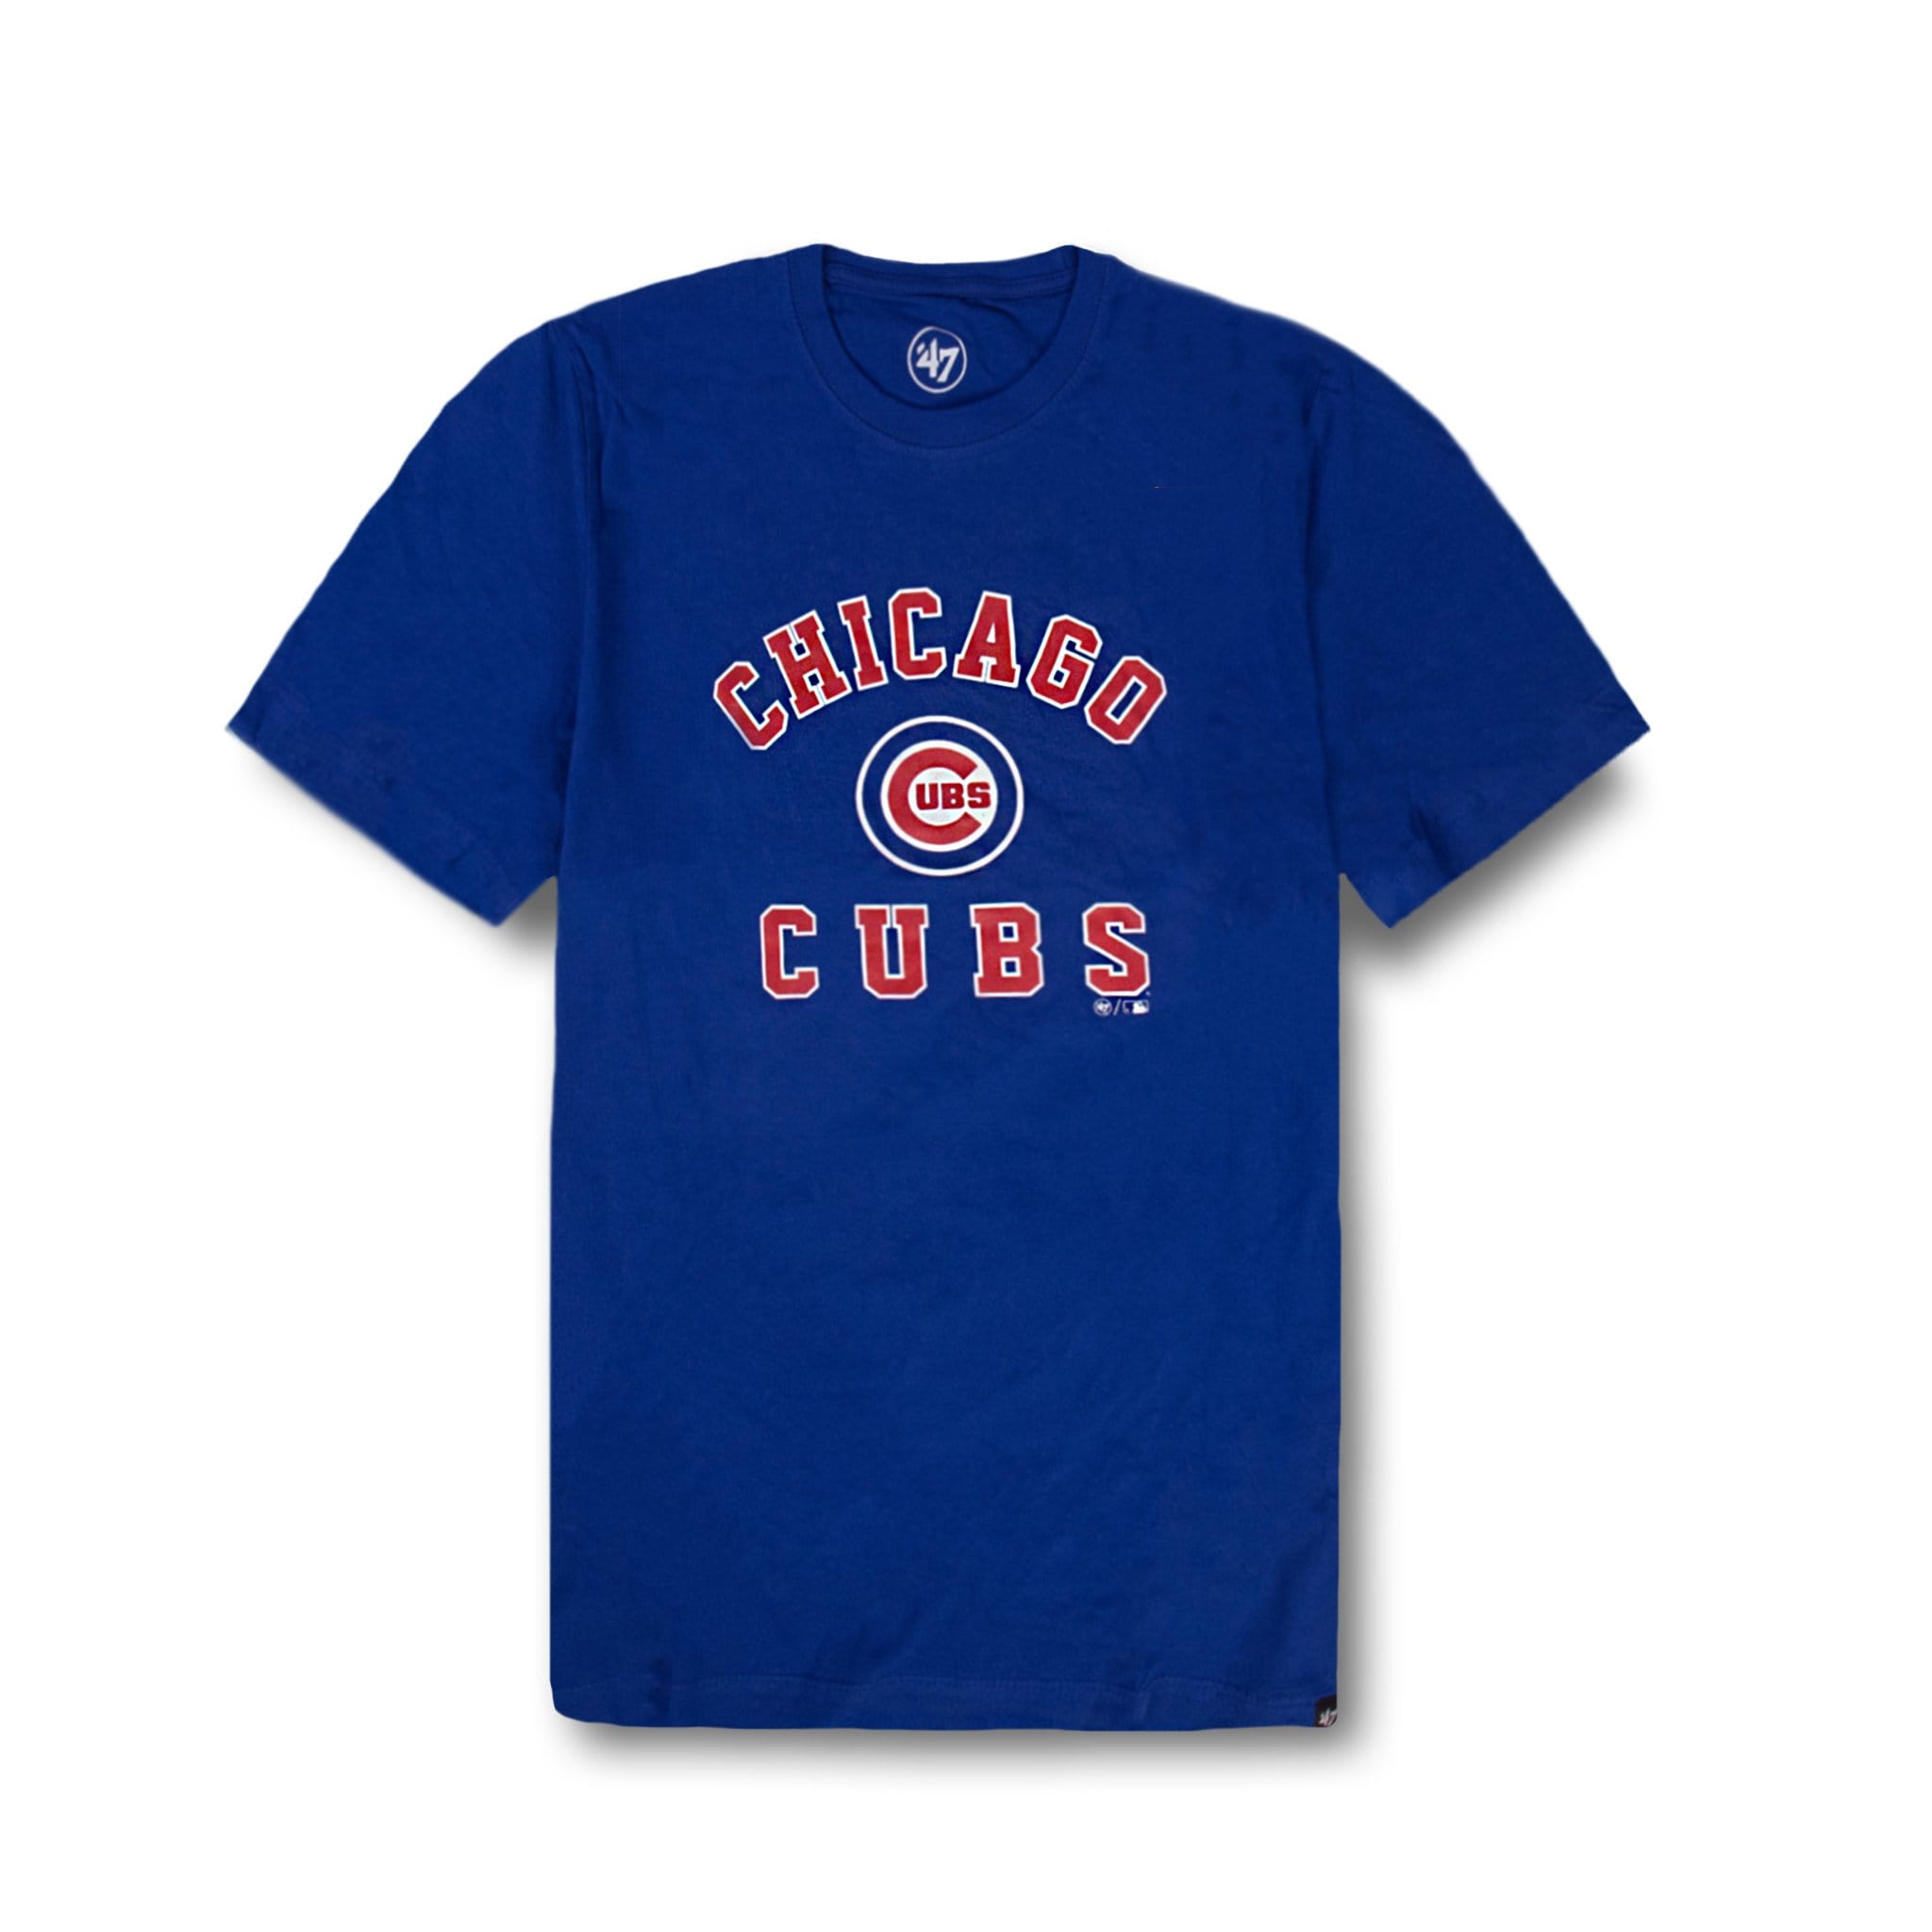 white chicago cubs t shirt